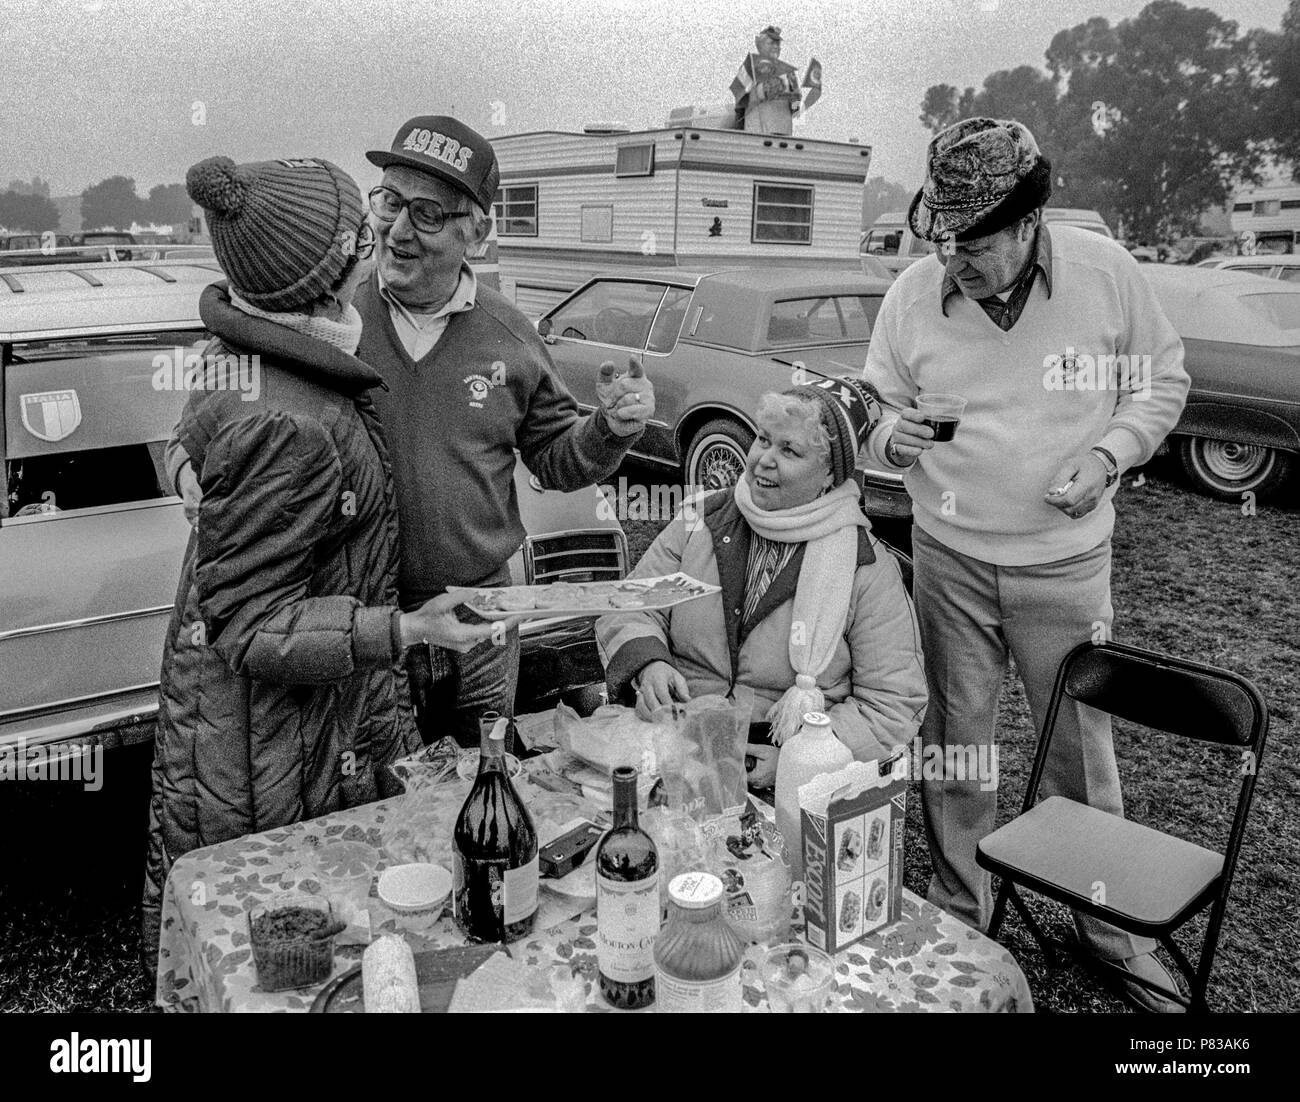 Stanford, California, USA. 20th Jan, 1985. 49ers fans eat and drink before the game at the Super Bowl XIX tailgate on the Stanford University campus. The San Francisco 49ers defeated the Miami Dolphins 38-16 on Sunday, January 20, 1985. Credit: Al Golub/ZUMA Wire/Alamy Live News Stock Photo